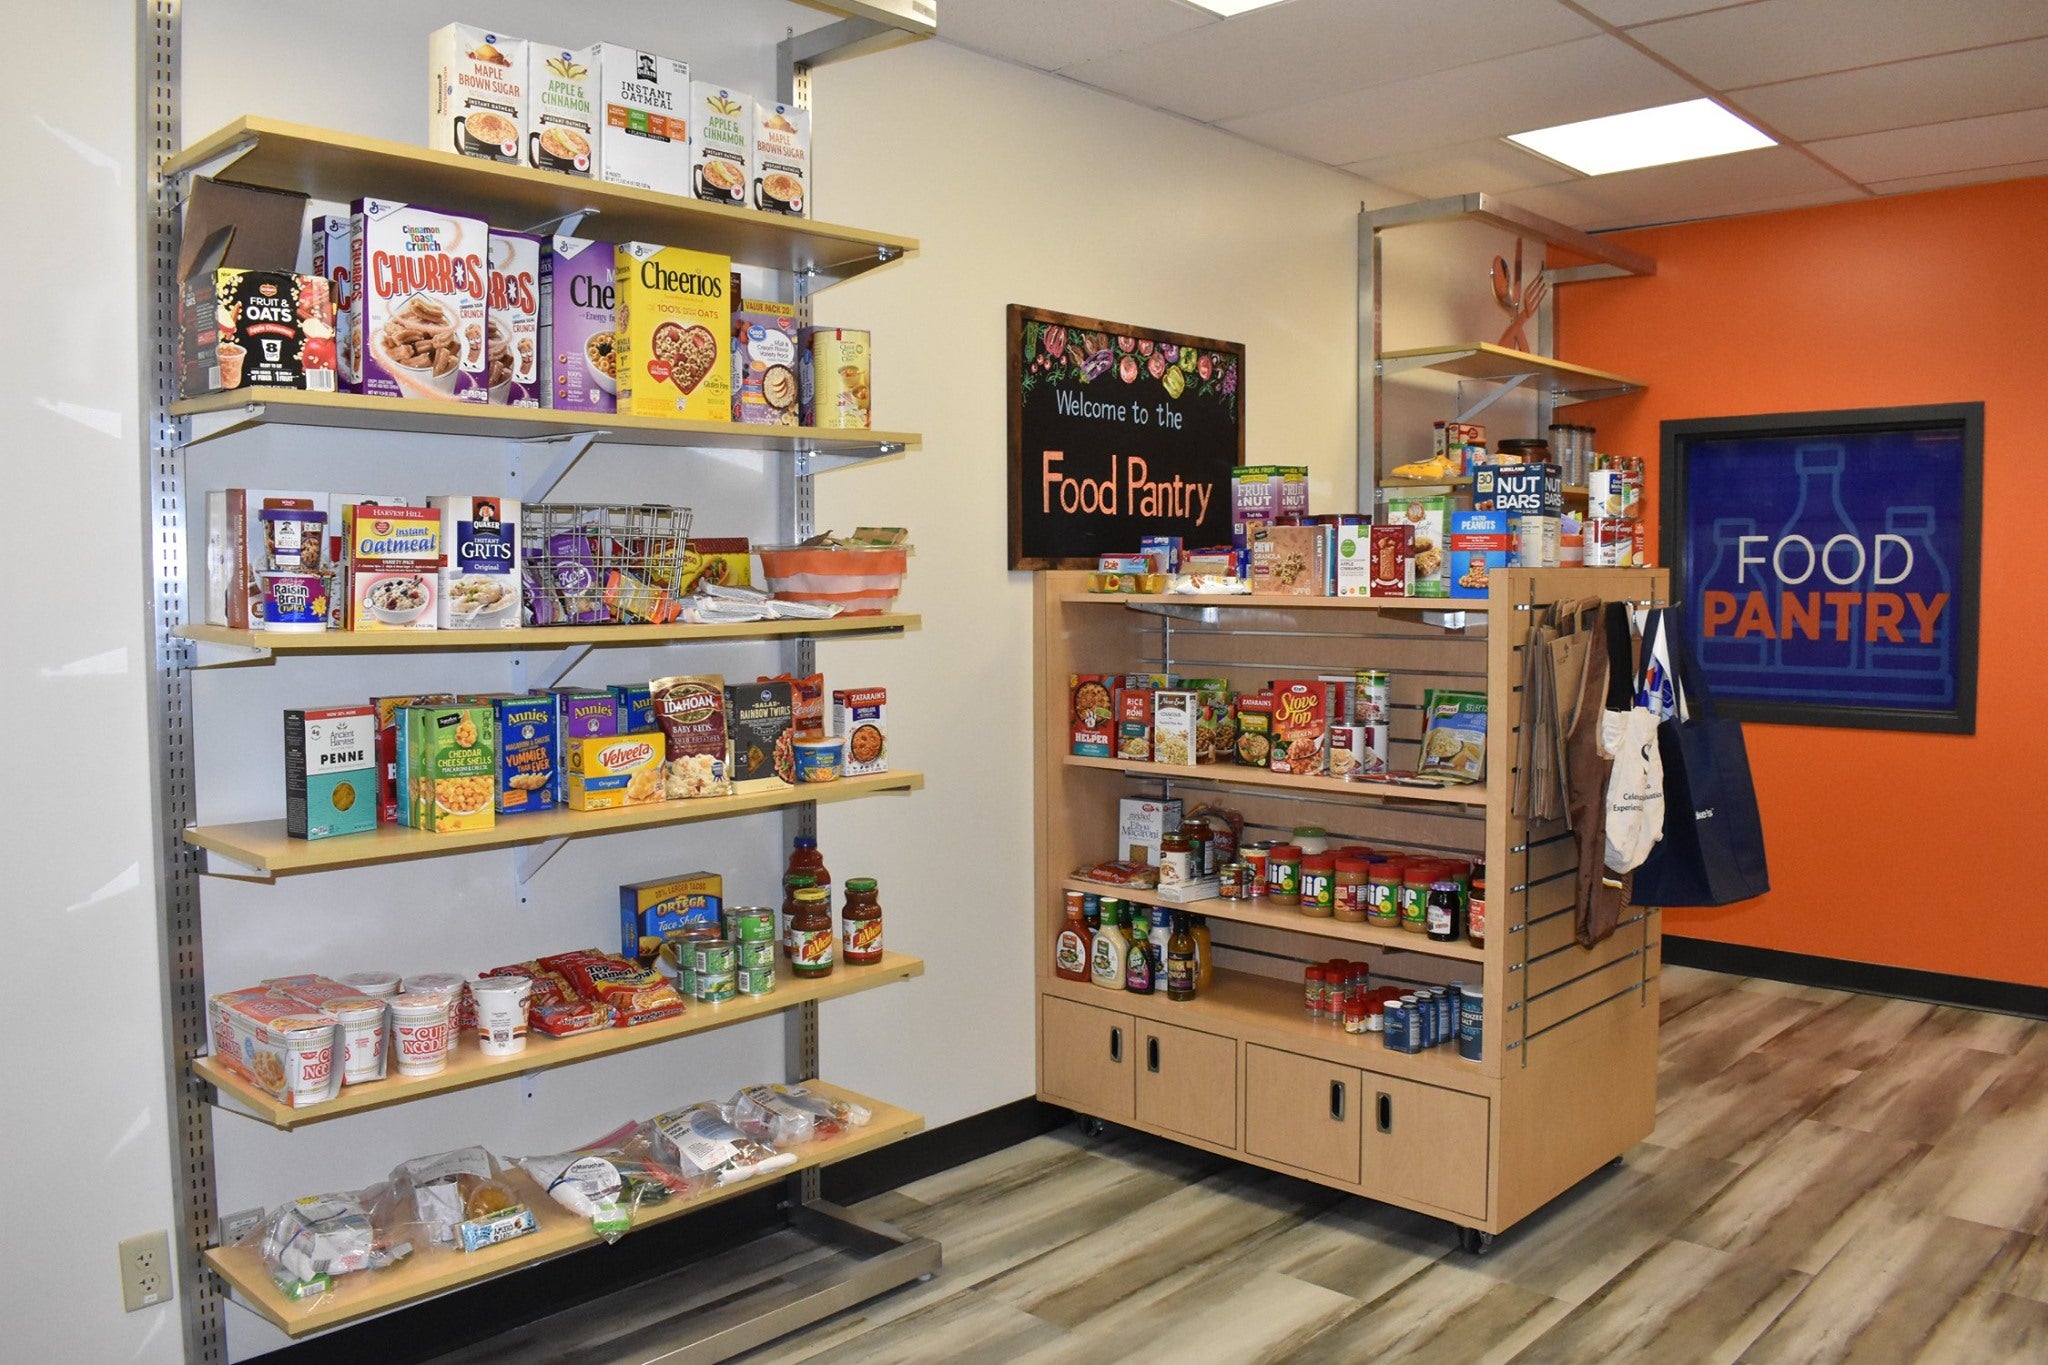 Food pantry with shelves of food